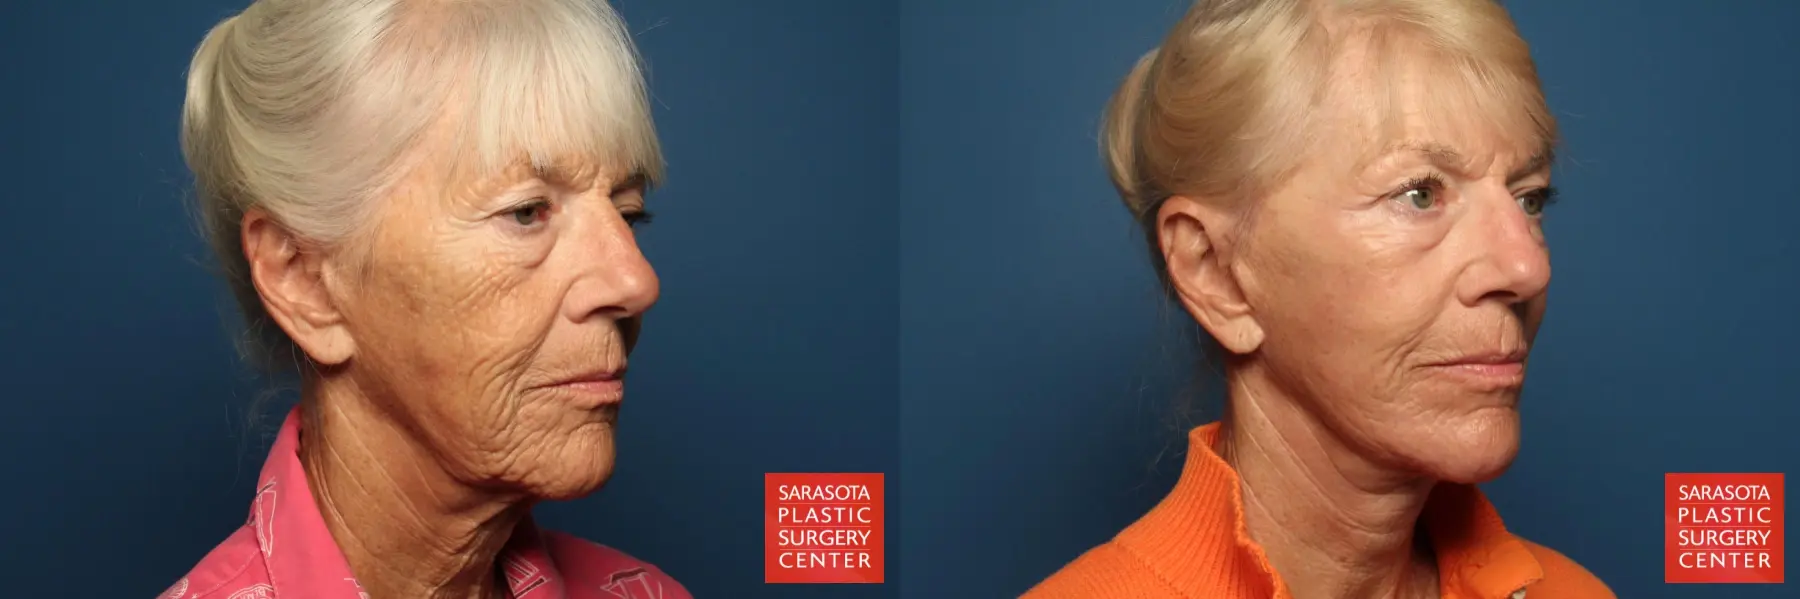 Cheek Lift: Patient 5 - Before and After 2